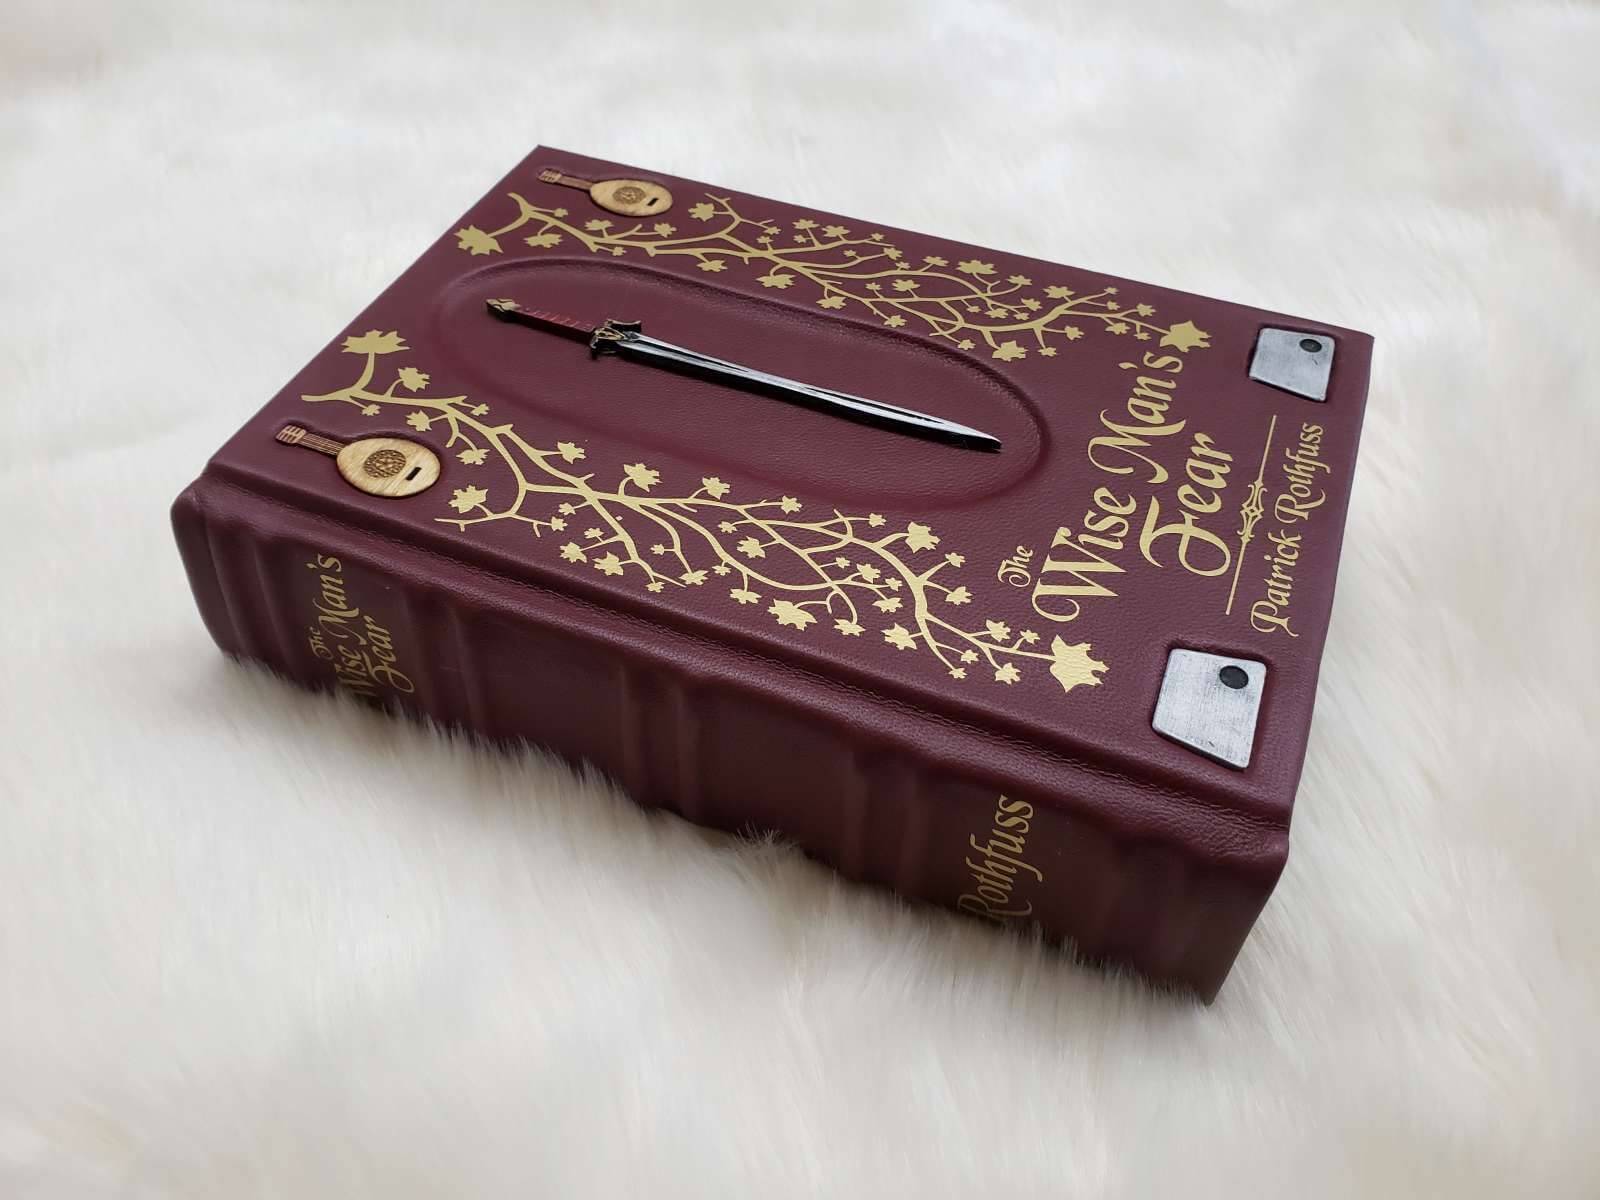 The Wise Mans Fear Patrick Rothfuss Leatherbound Leather Book Collectors Edition 17